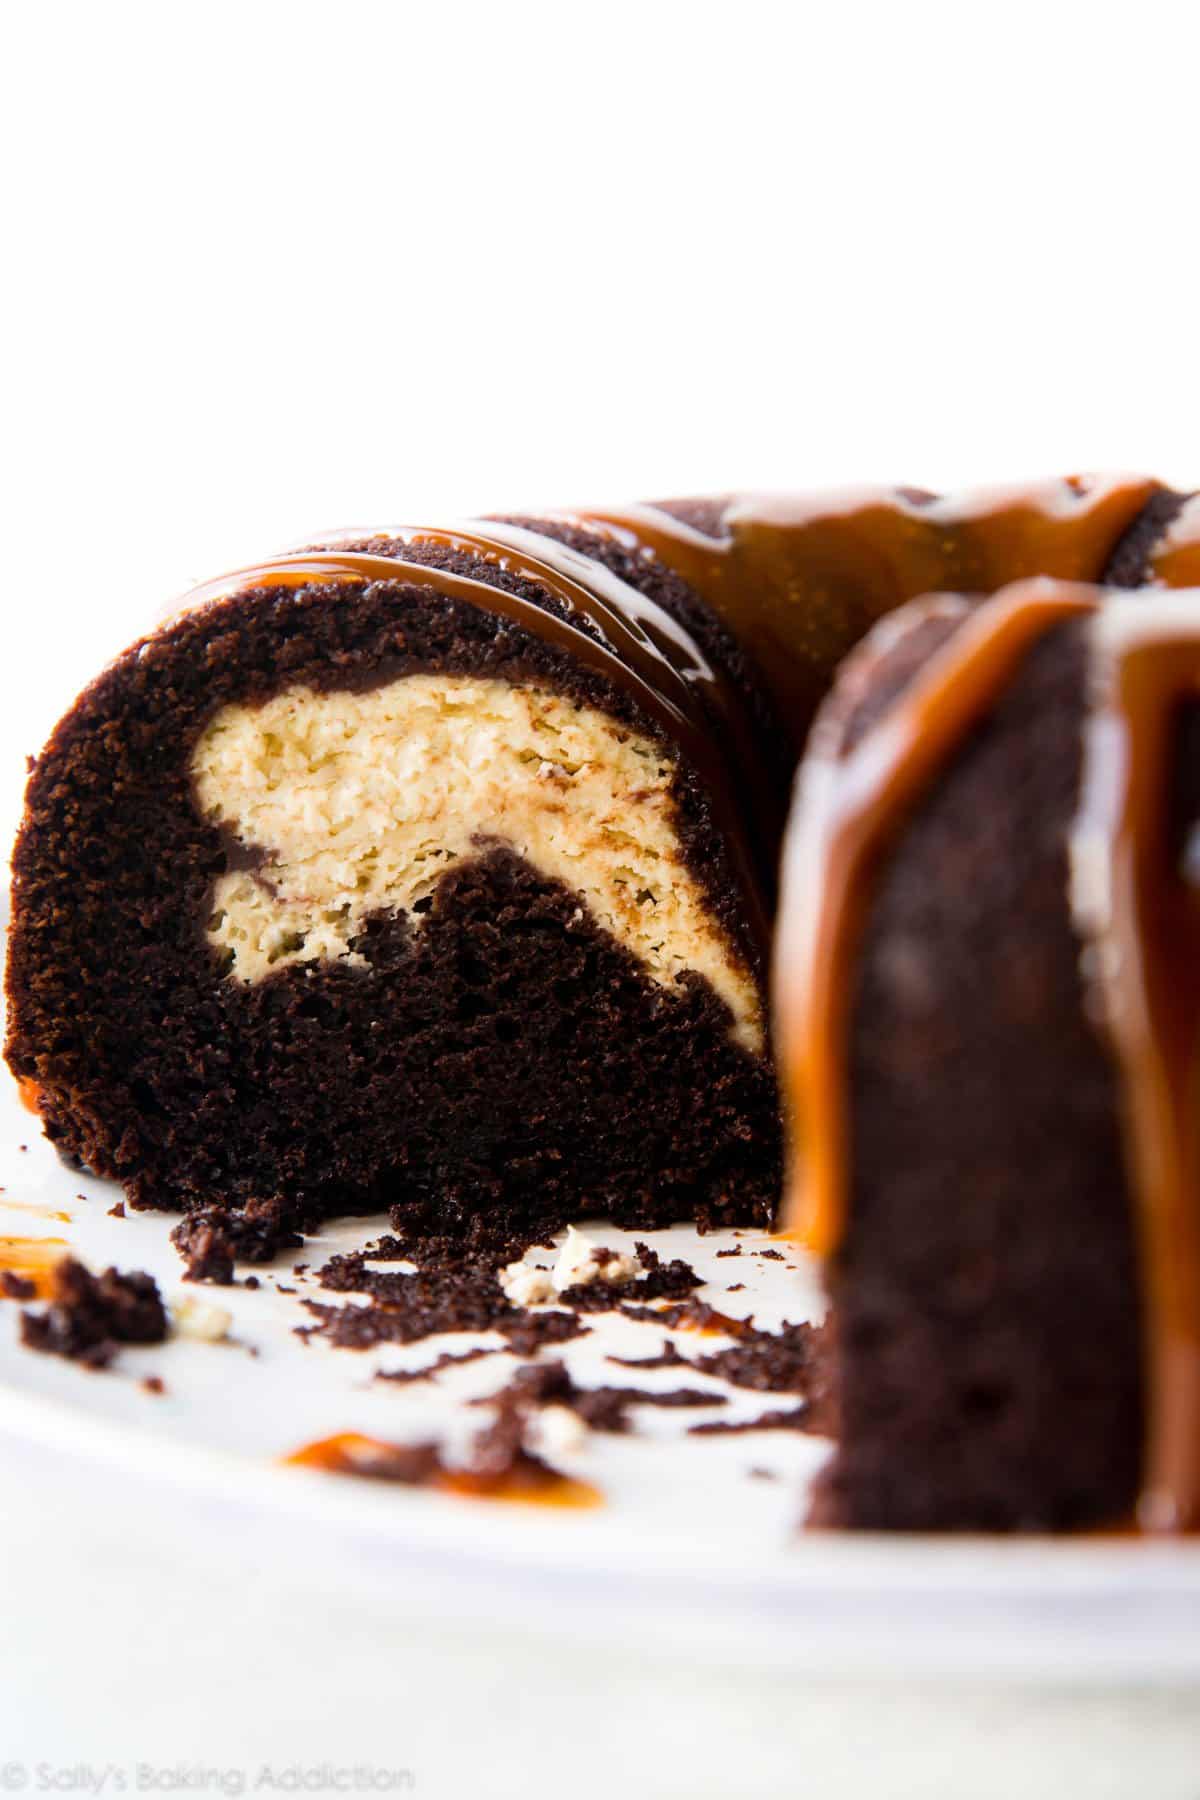 side view of chocolate cream cheese bundt cake showing the cream cheese filling